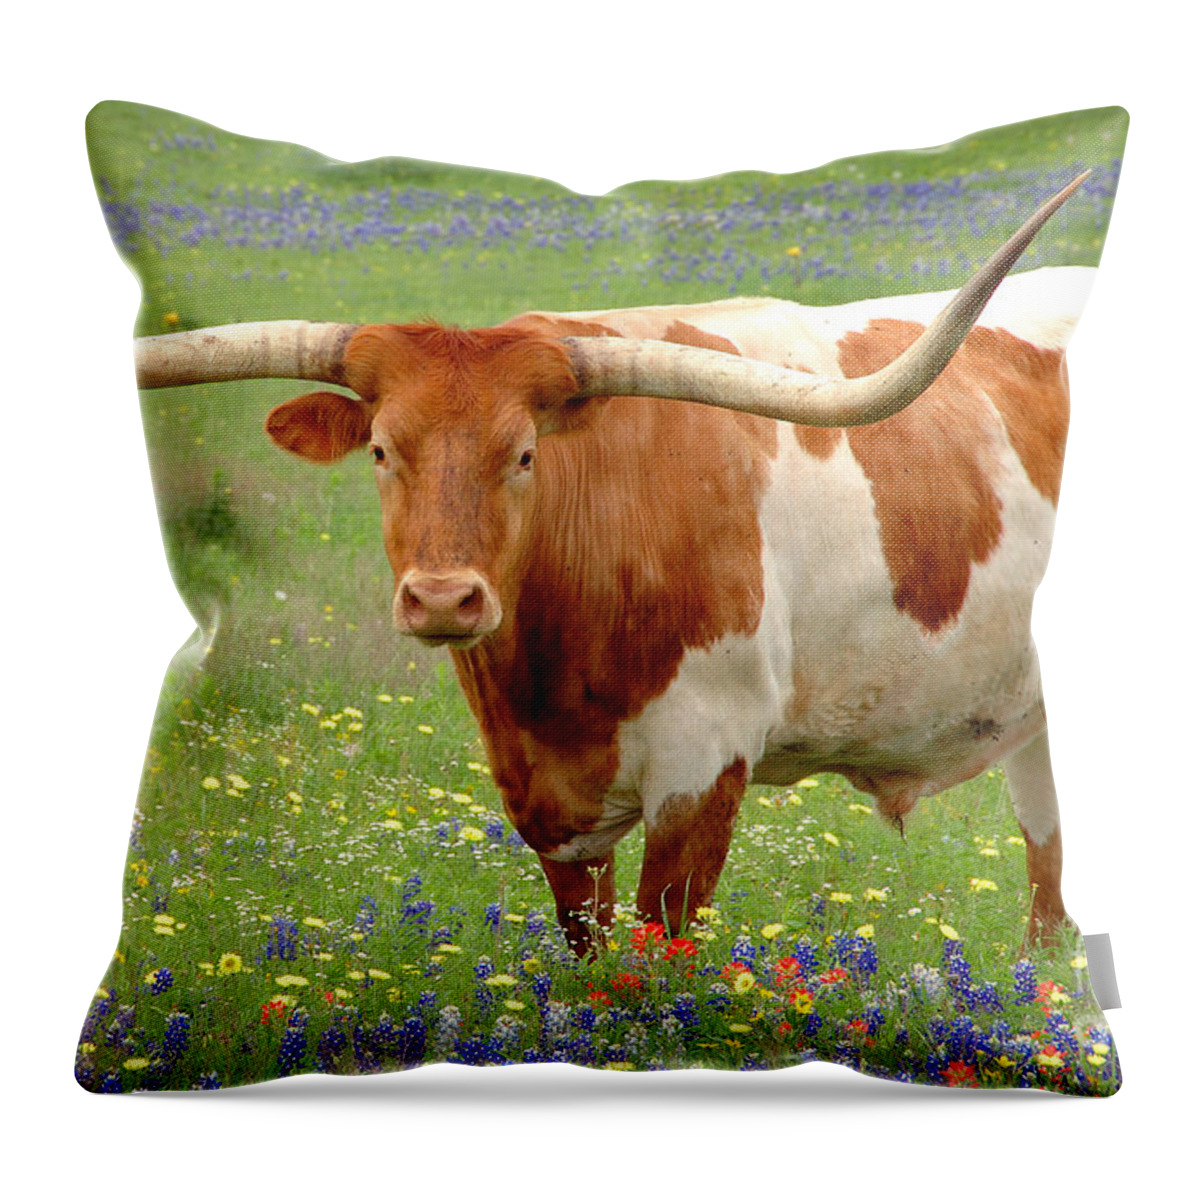 Texas Longhorn In Bluebonnets Throw Pillow featuring the photograph Texas Longhorn Standing in Bluebonnets by Jon Holiday